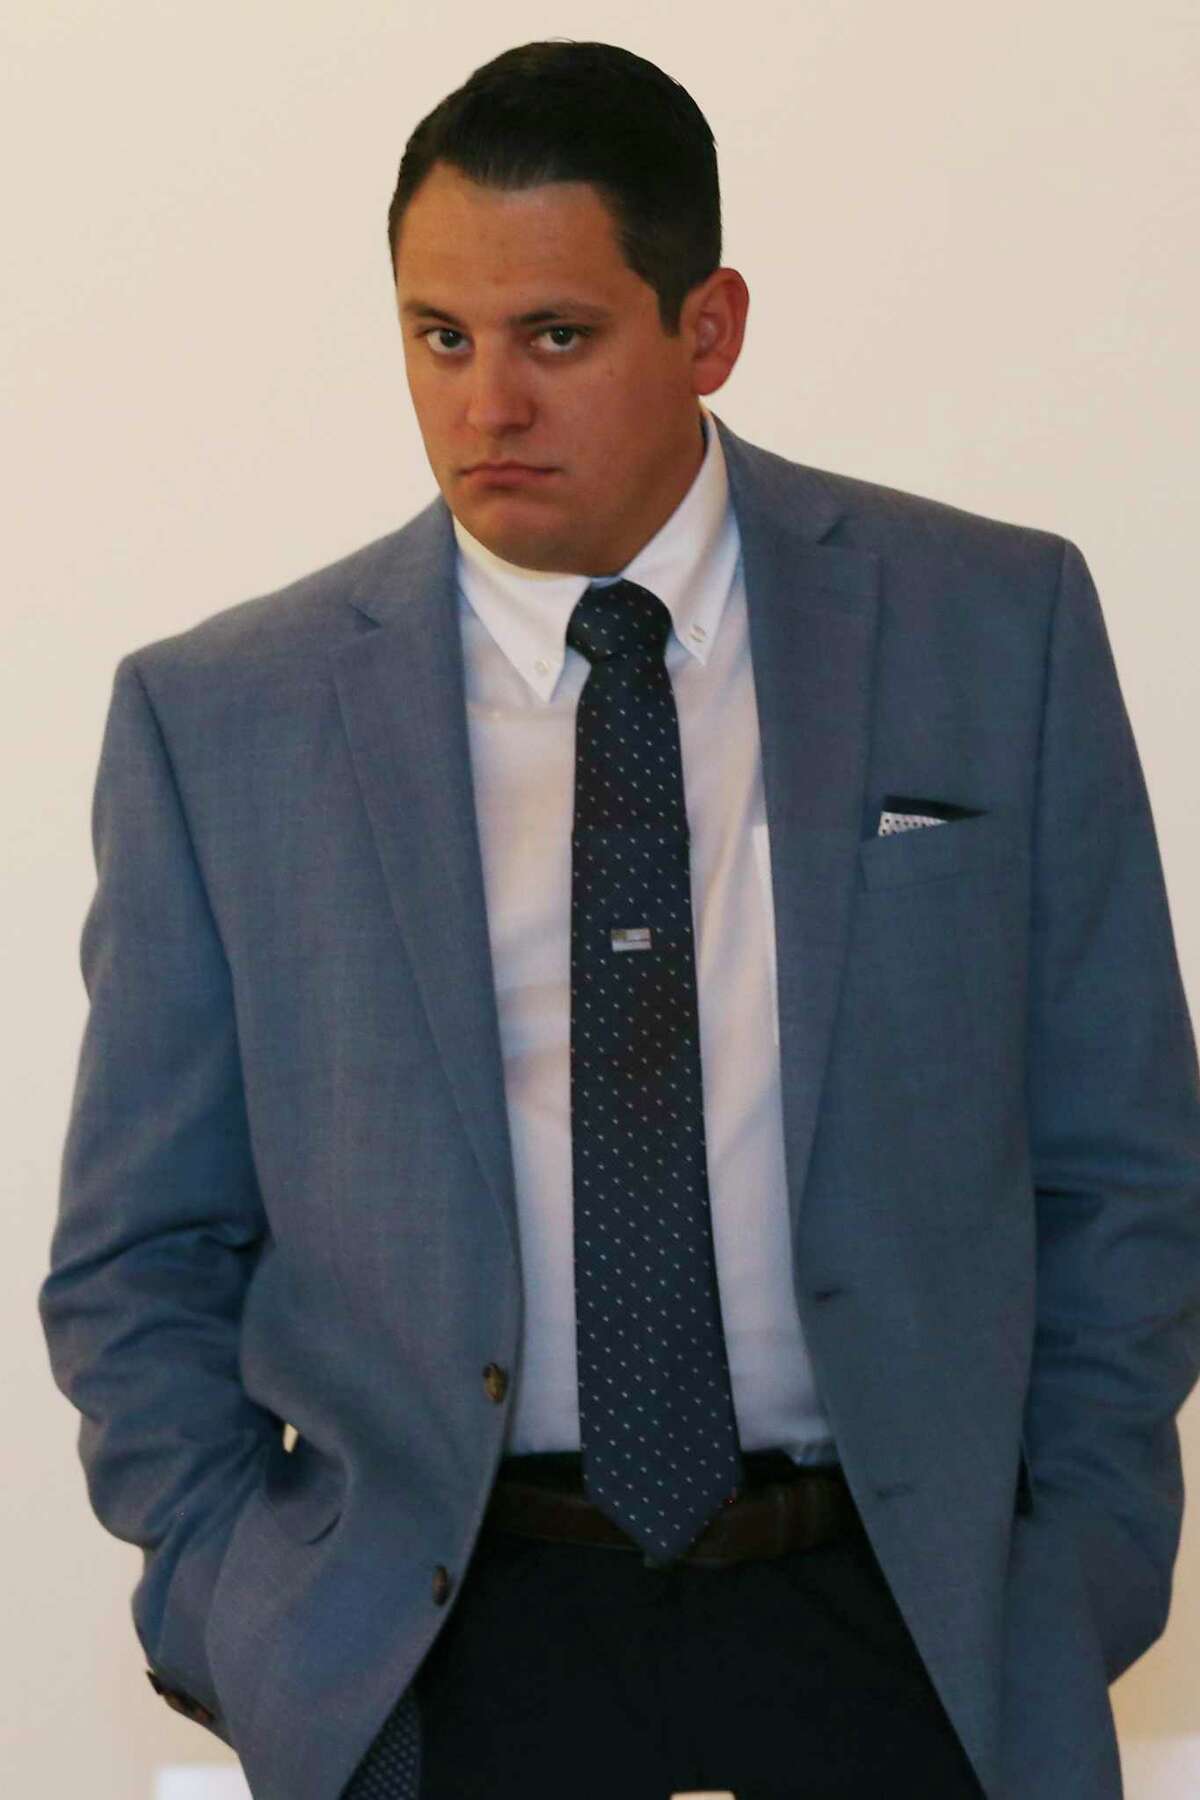 Fired San Antonio Police officer Justin Ayars attends an arbitration hearing June 25, 2019, about his appeal to get his job back. Ayars was fired after an altercation with his then-fiance, Krista Cooper-Nurse. Chief William McManus fired Ayars in August, finding that Ayars violated two rules.